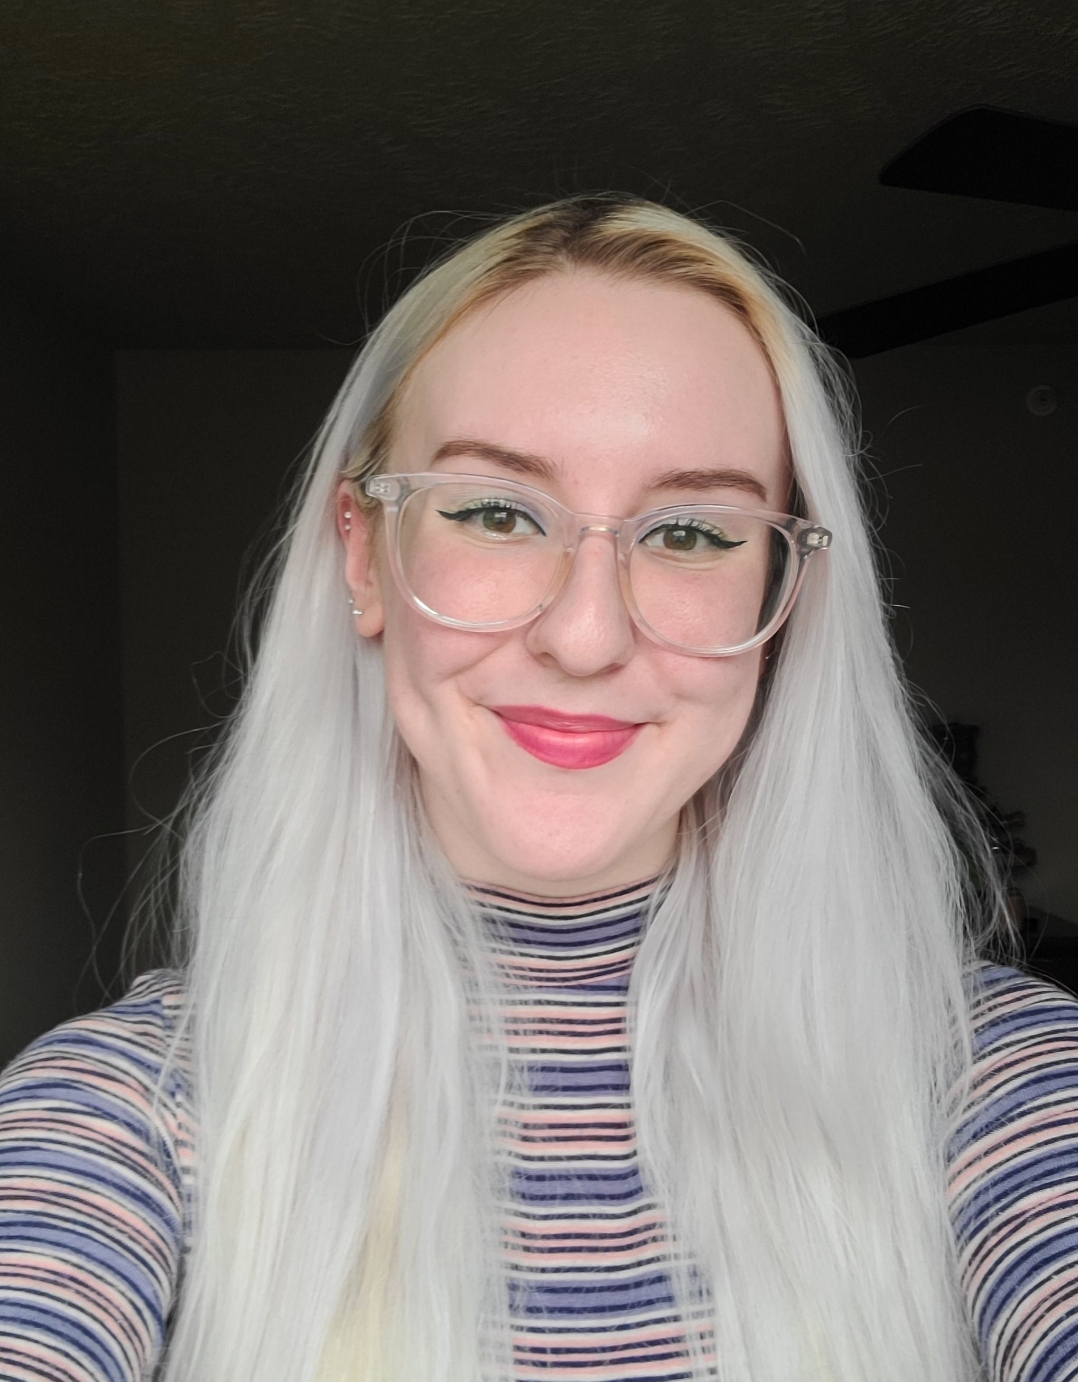 platinum blonde white woman with clear frame glasses smiling wearing a colorful stripped turtle neck shirt